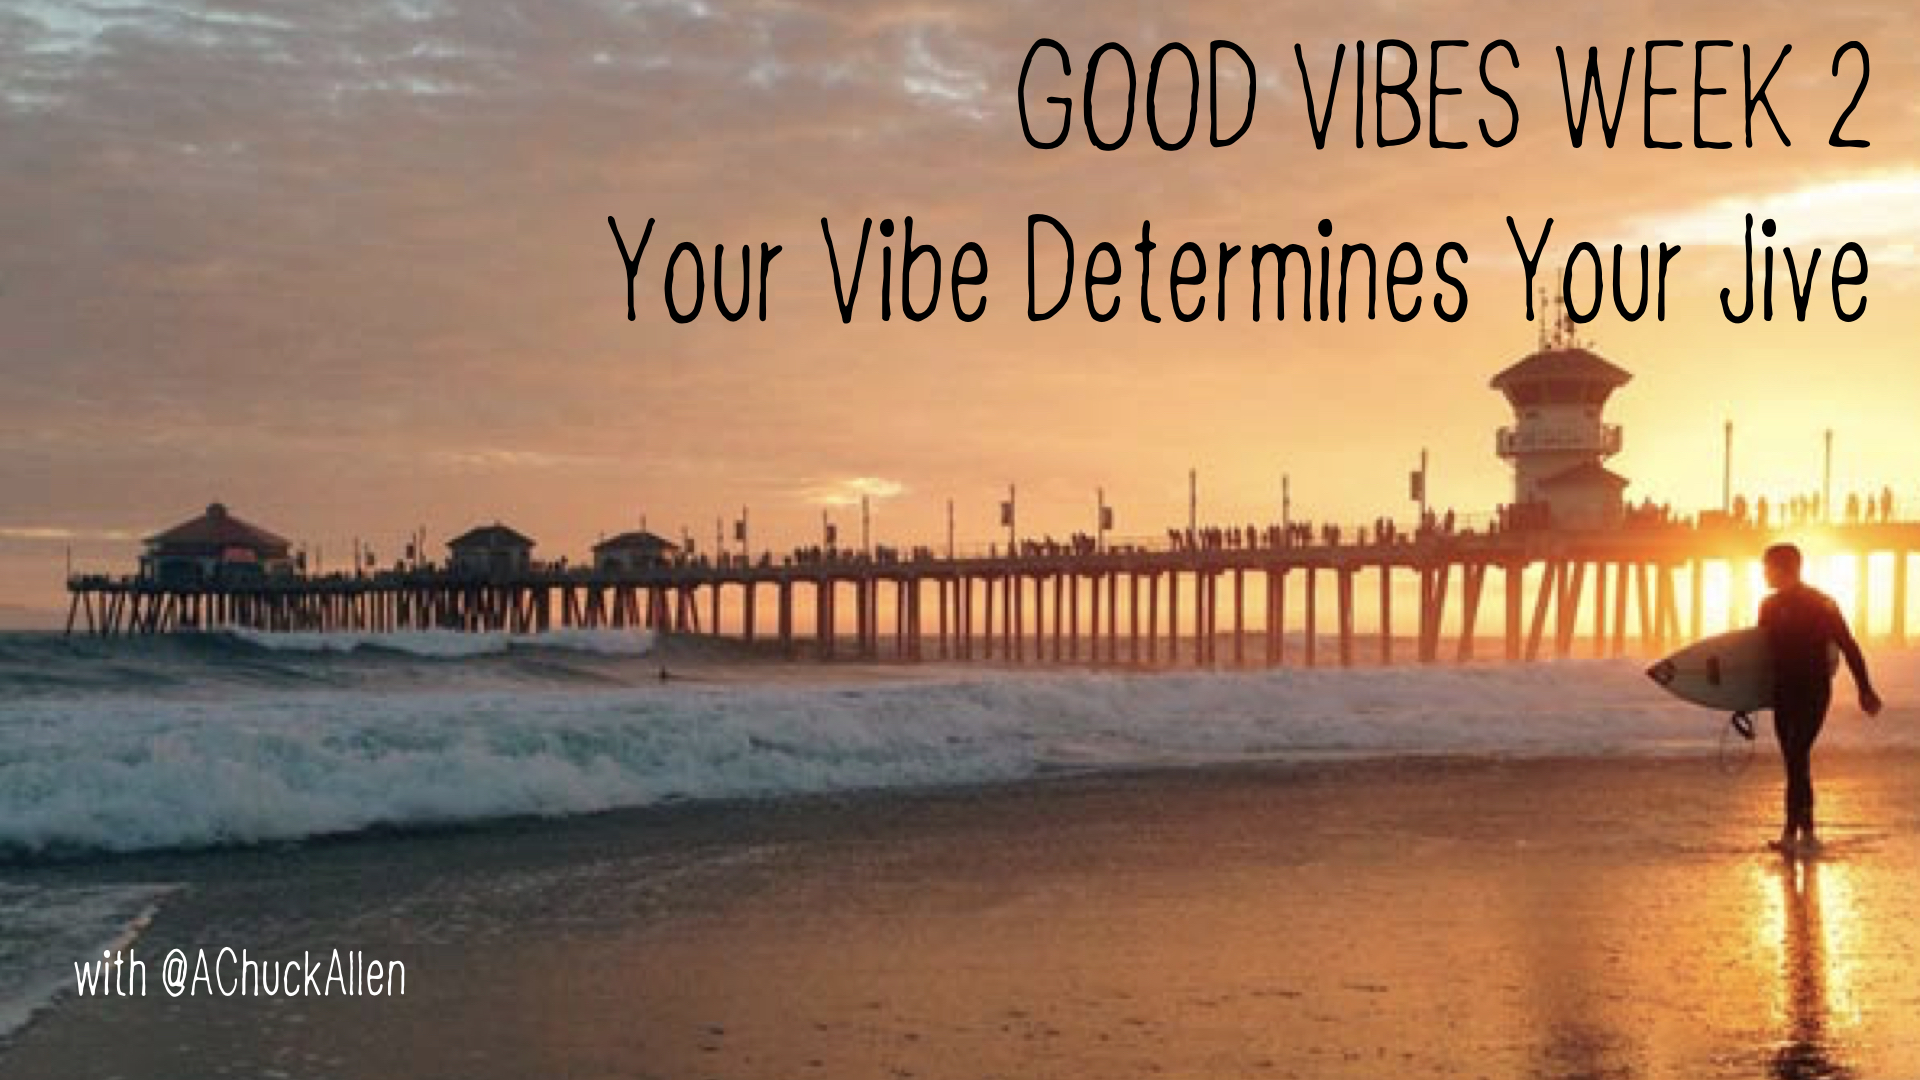 Your Vibe Determines Your Jive Image